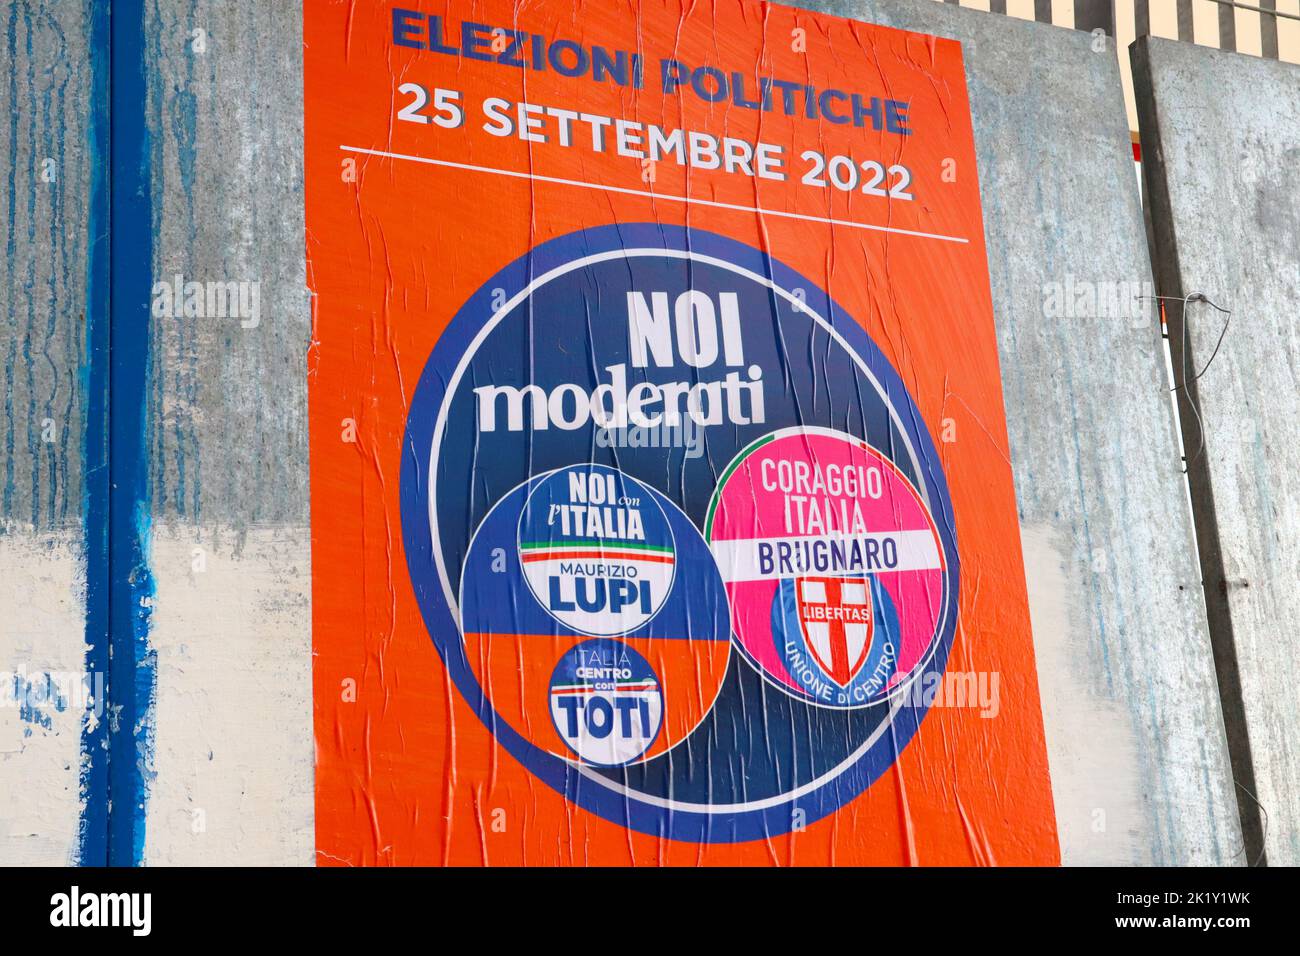 Italian Election wall poster with symbol of NOI MODERATI with Maurizio Lupi, Toti and Brugnaro for general election in Italy of September 25, 2022 Stock Photo